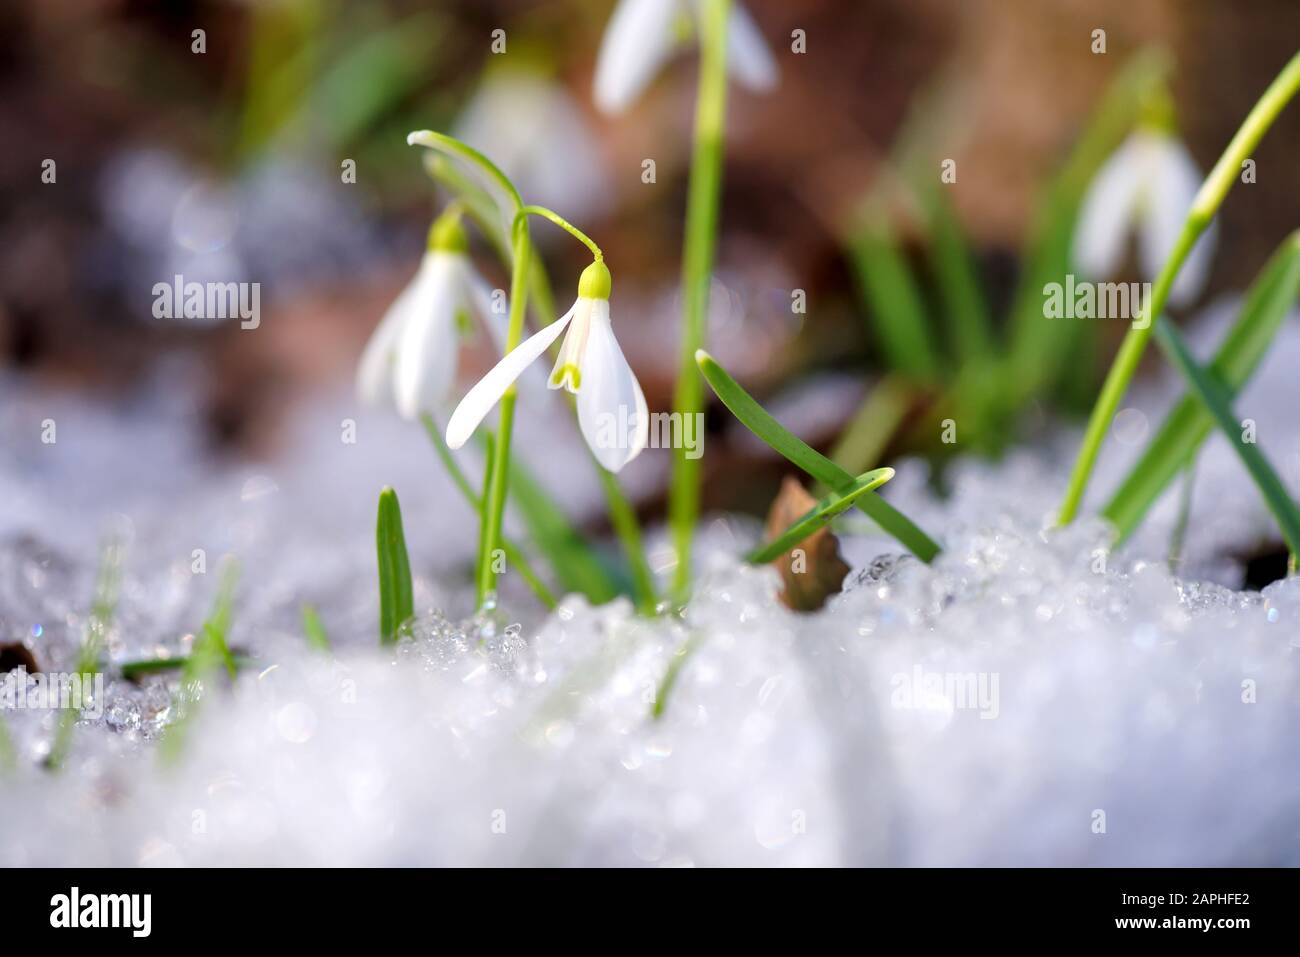 Snowdrops (Galanthus) in the spring forest. Harbingers of warming symbolize the arrival of spring. Stock Photo